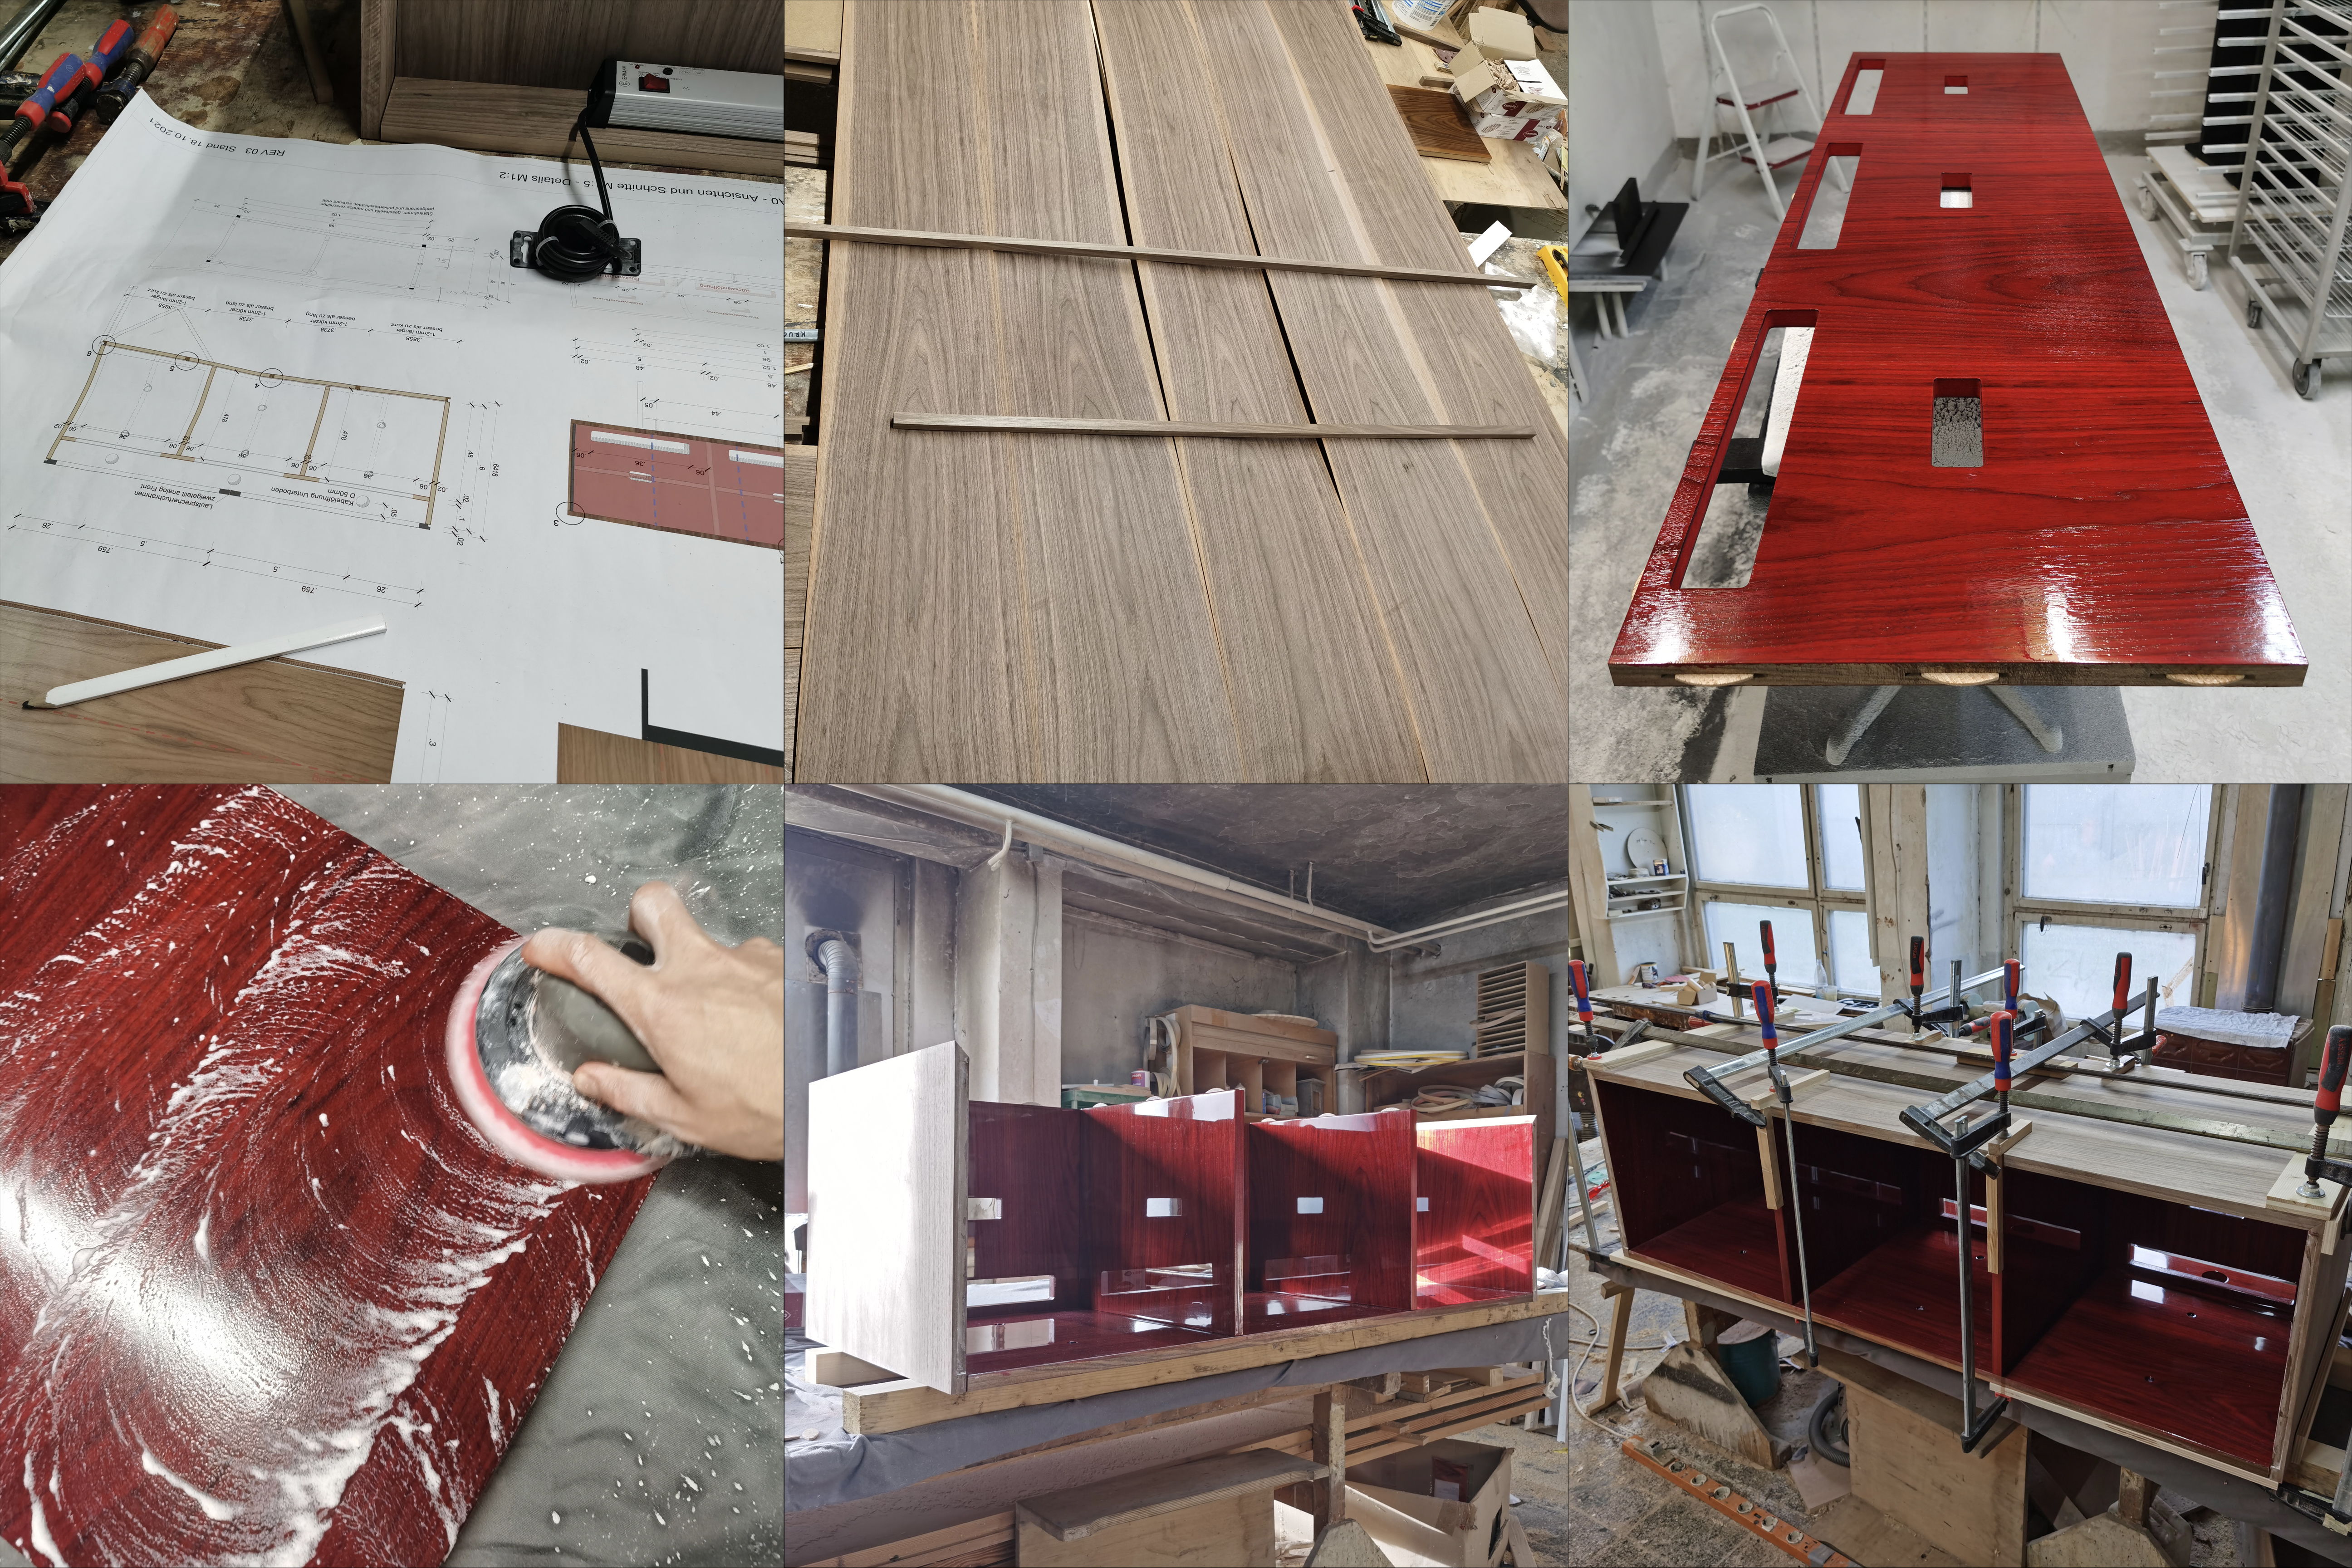 A collage of images during the cabinet build process